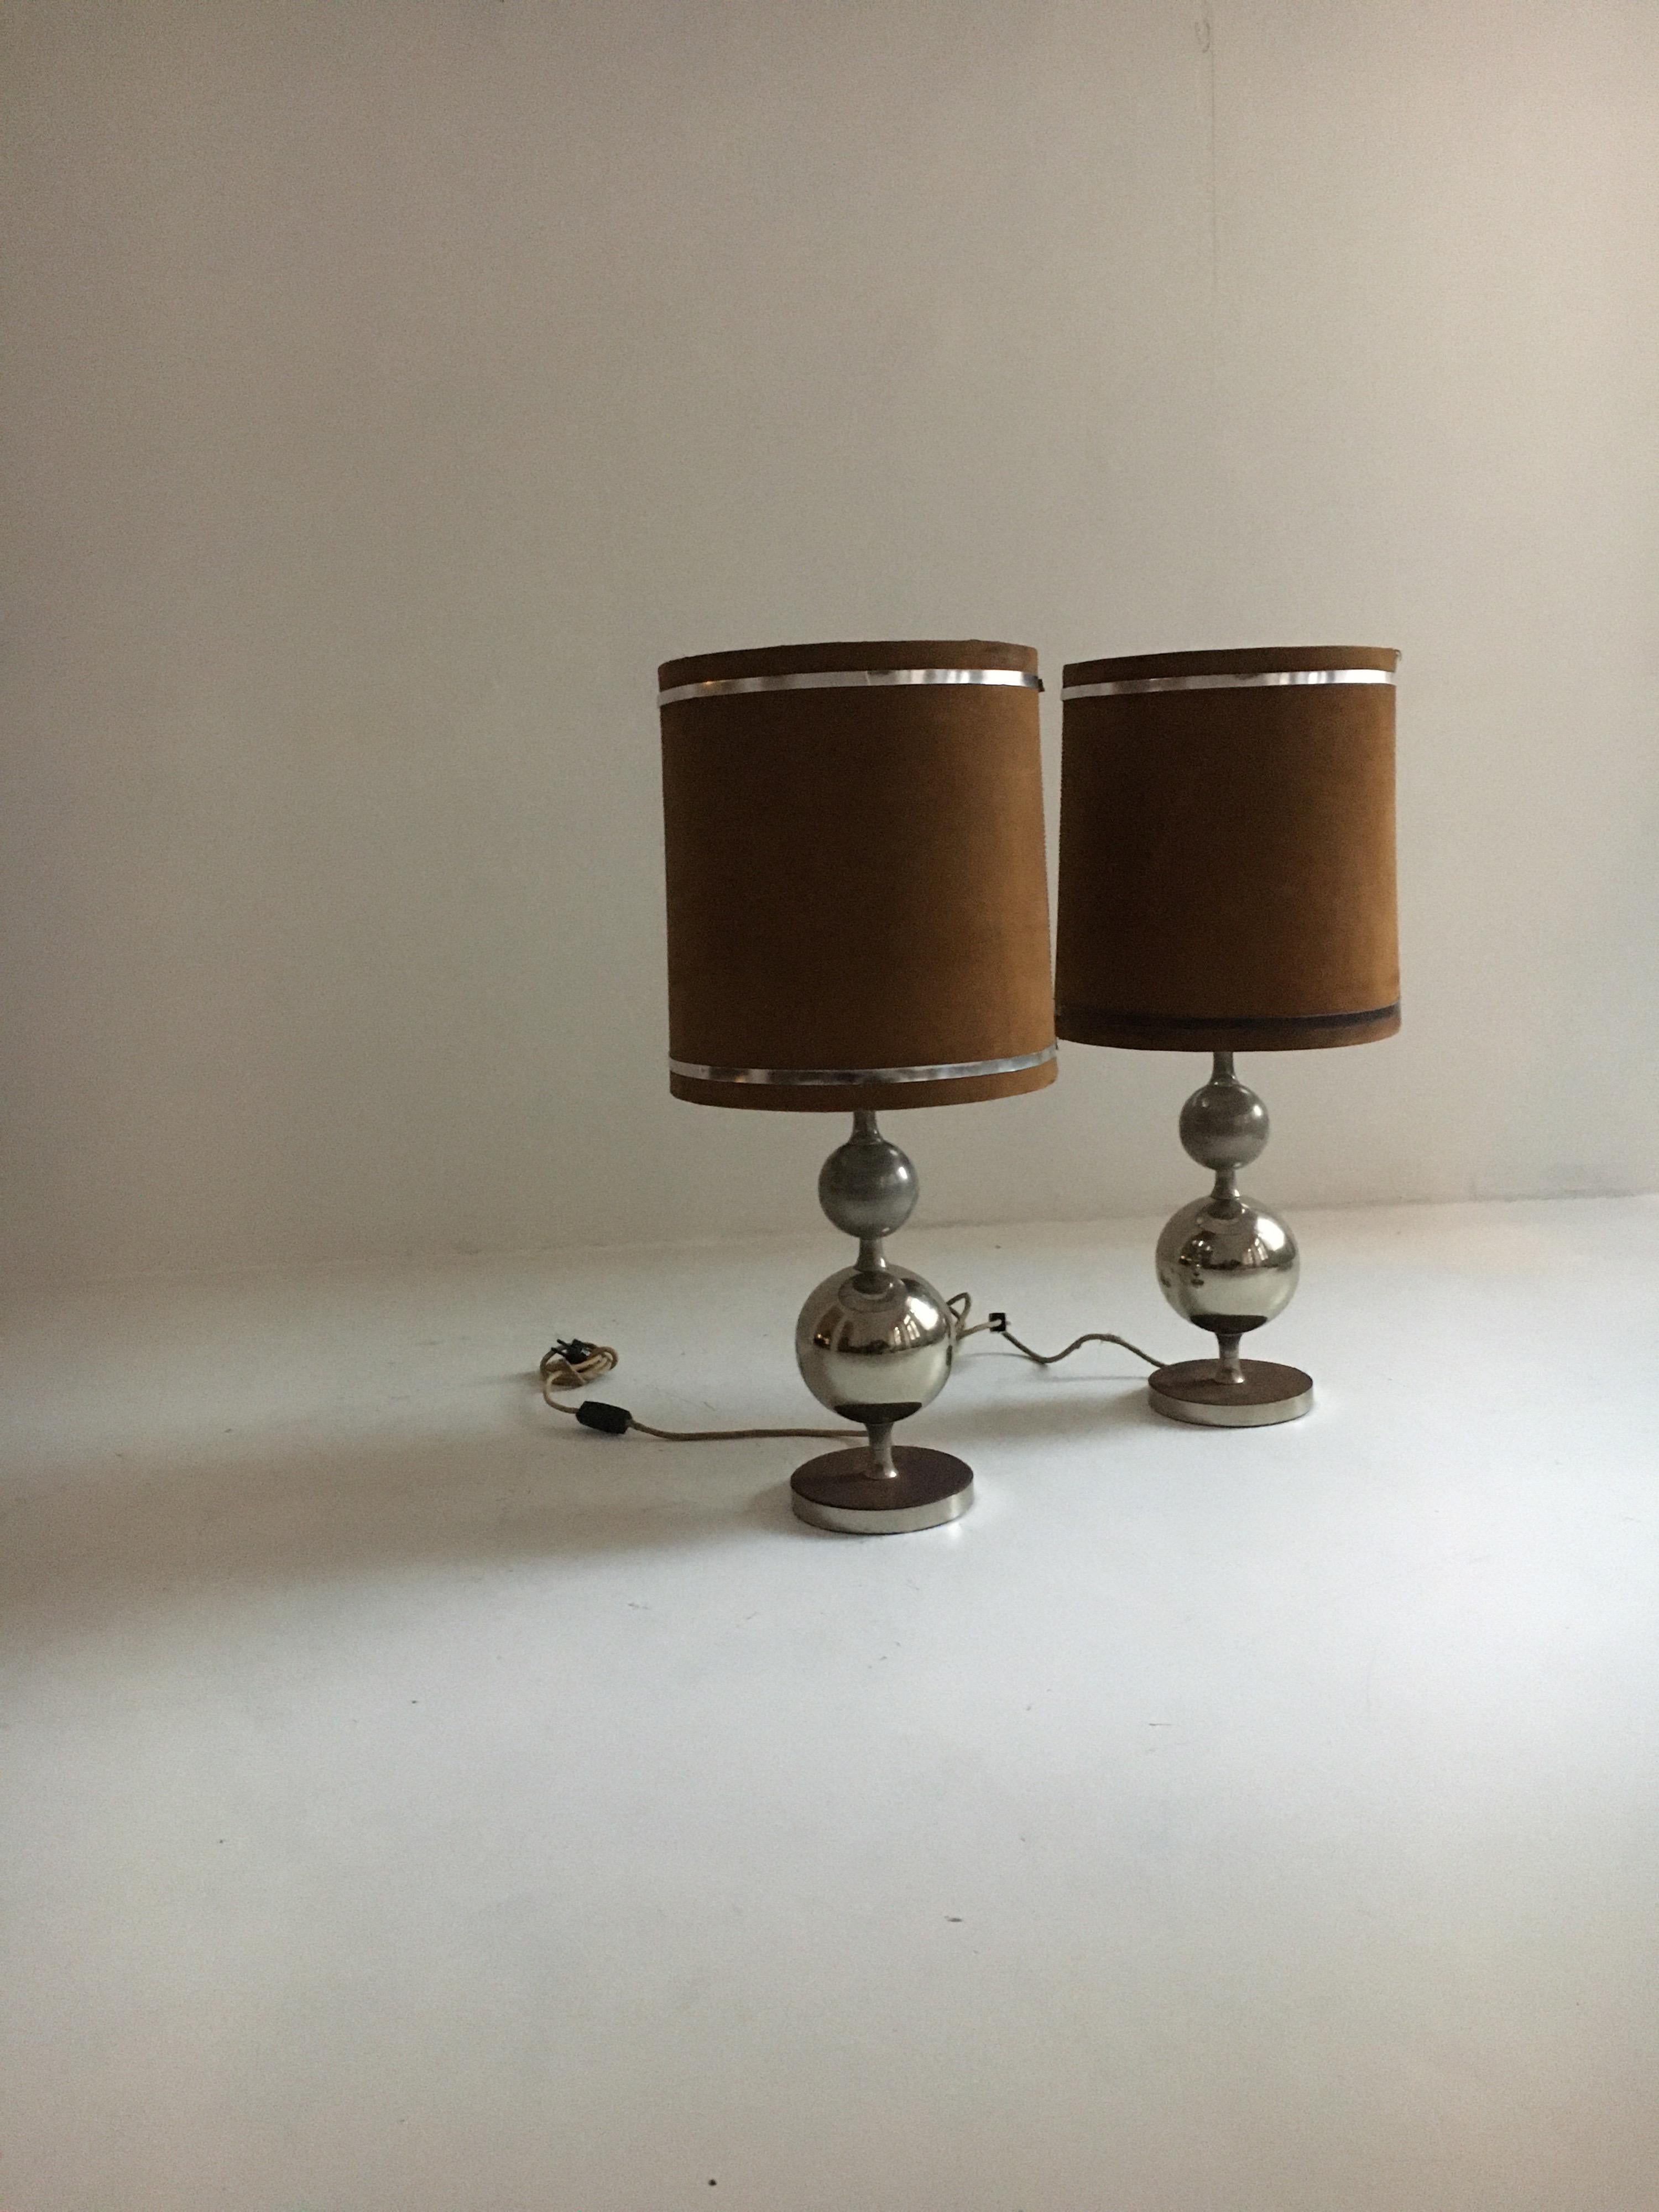 Late 20th Century Pierre Cardin Oversized Chrome and Suede Table Lamps, France, 1970s For Sale